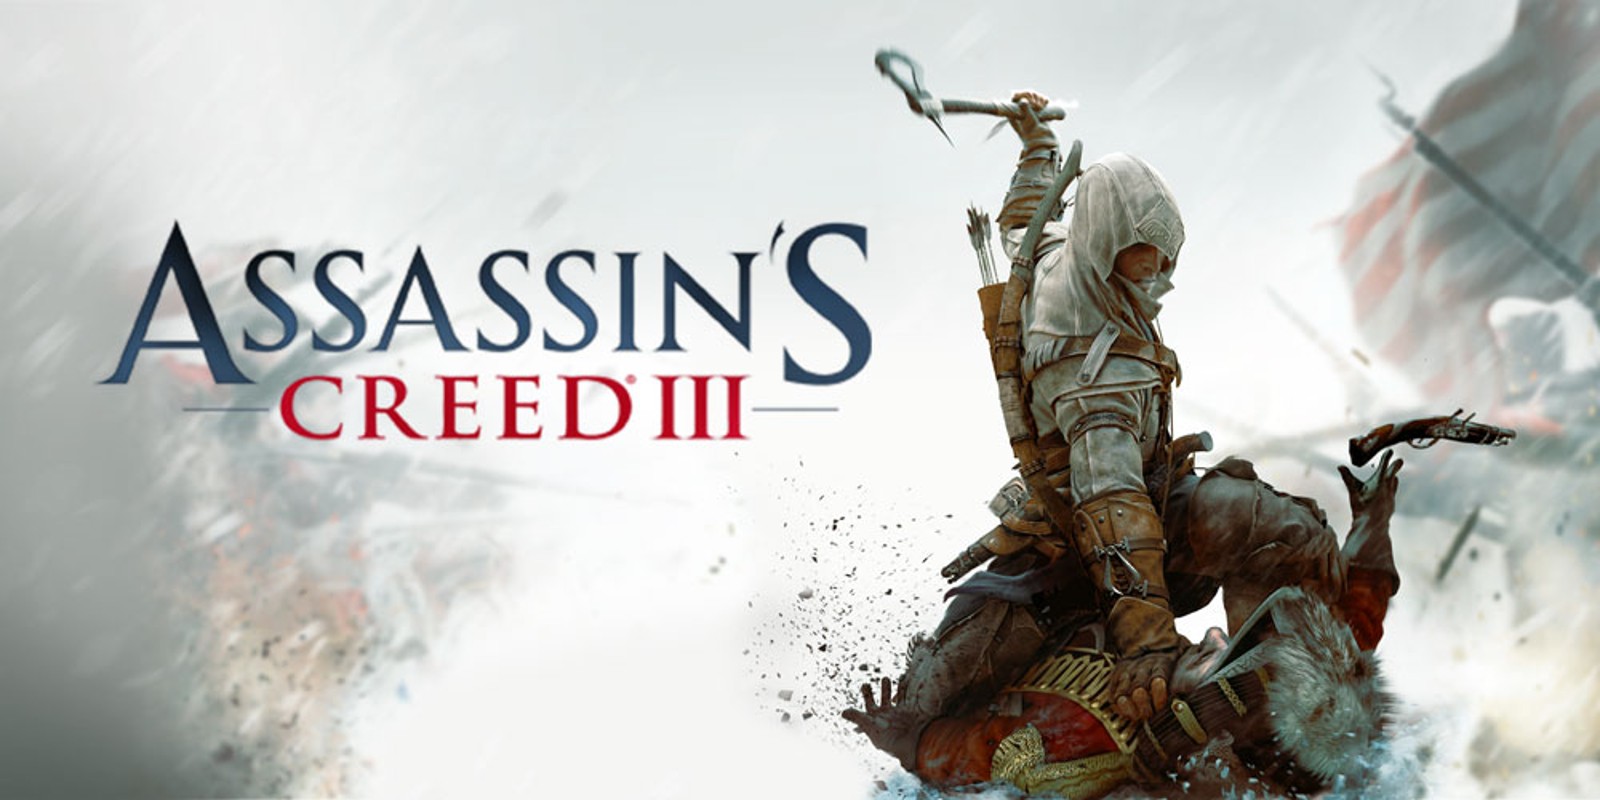 assassins creed 3 full game free download for mac